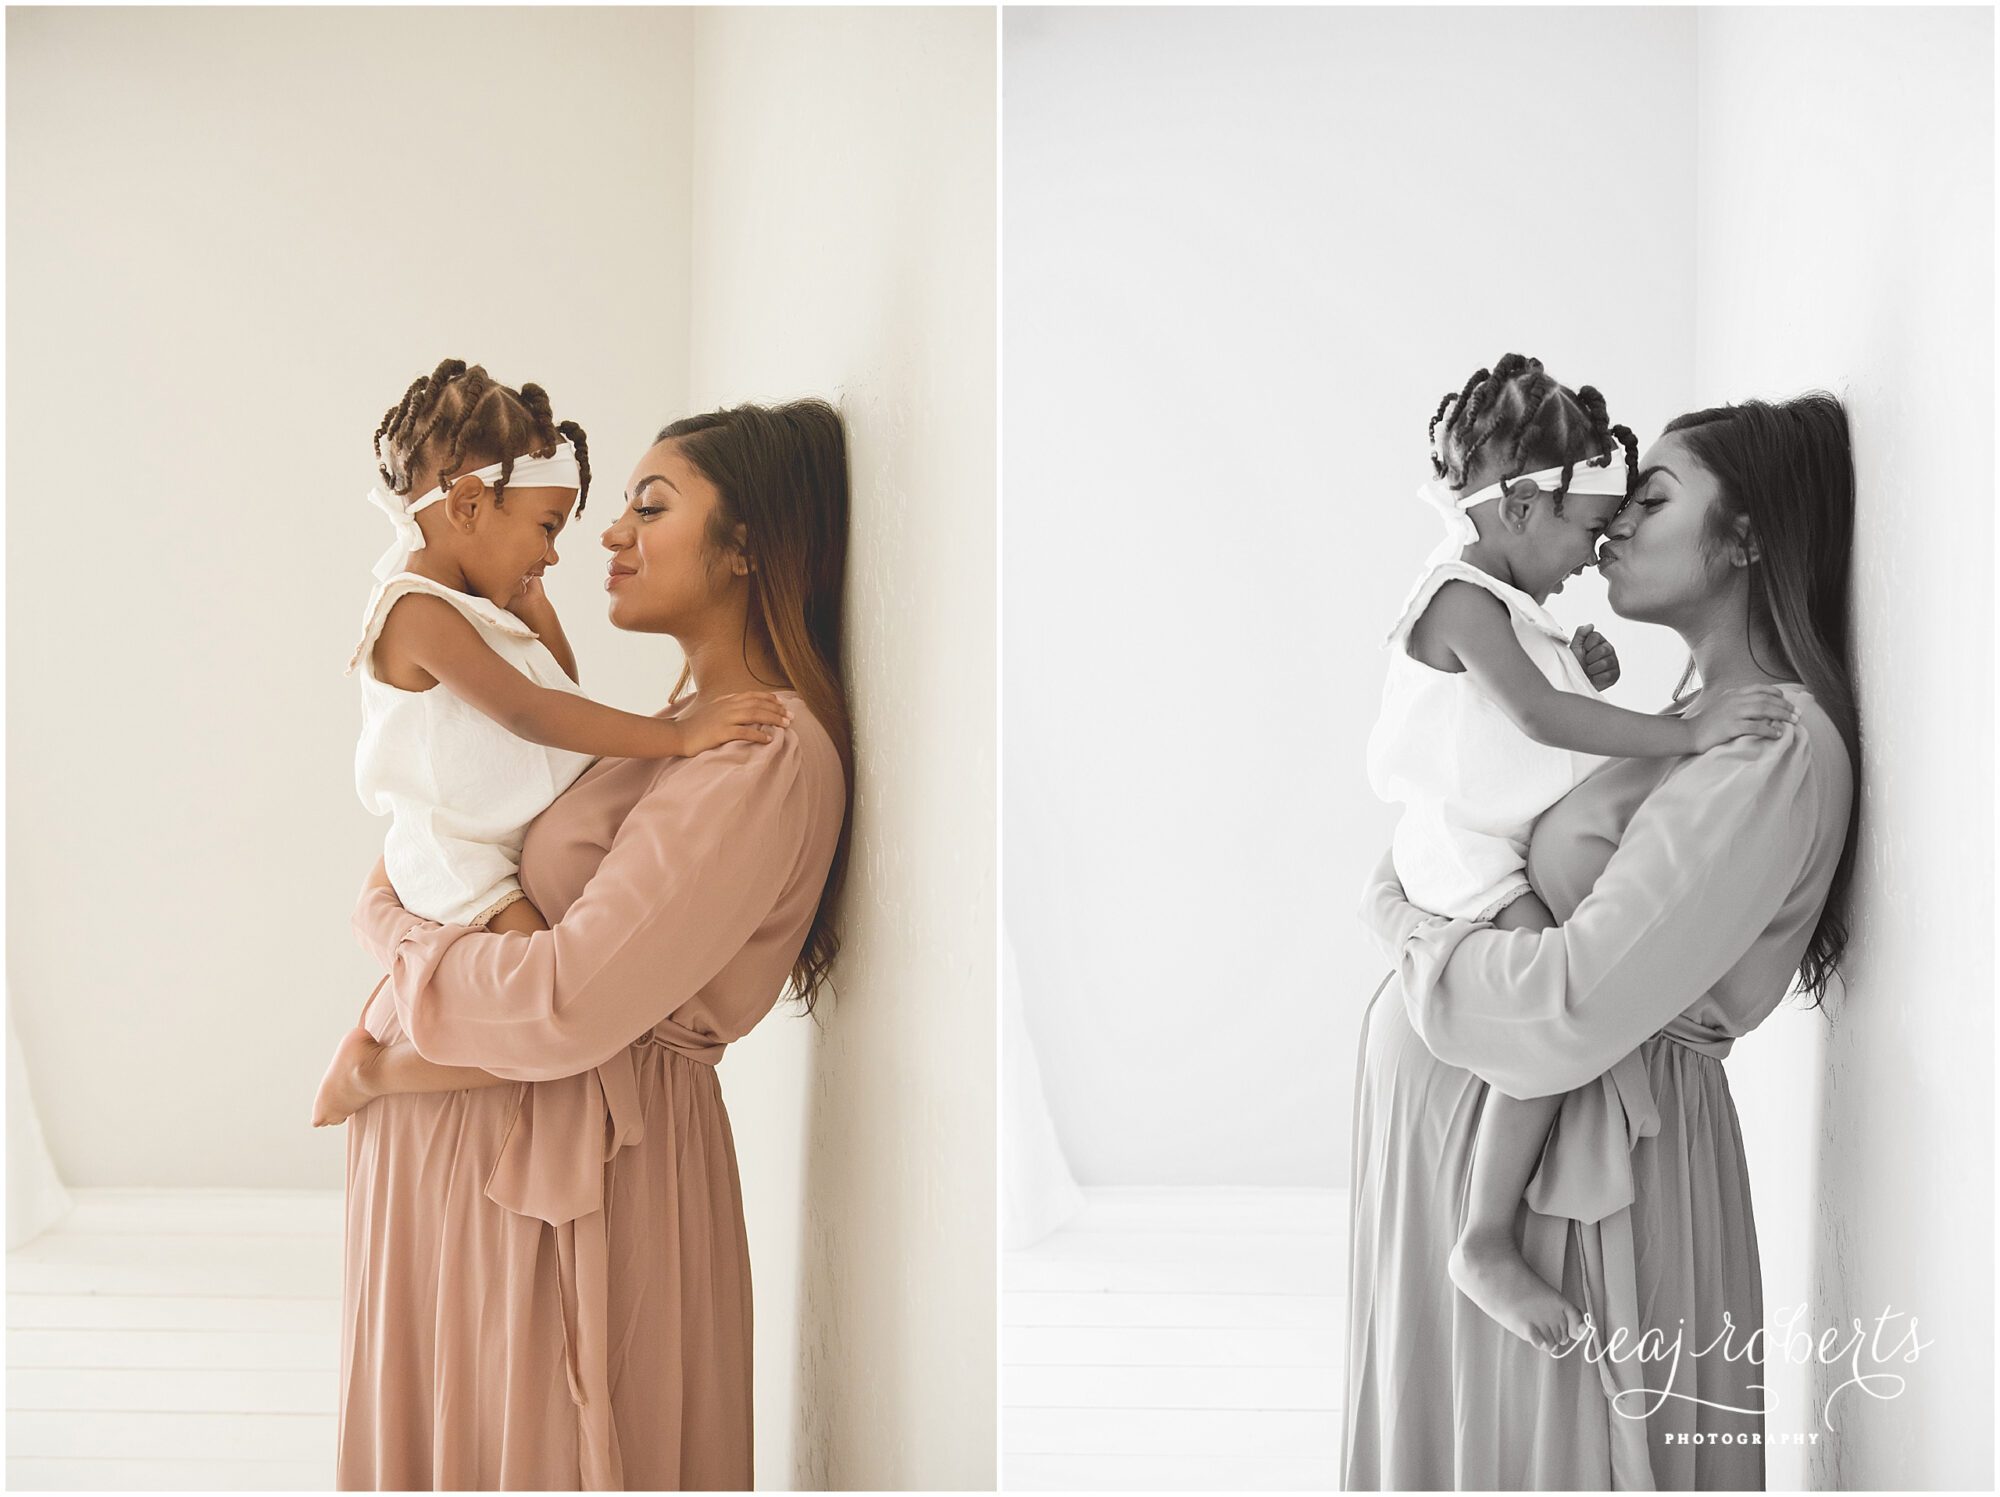 Pregnancy photos with older sibling | Reaj Roberts Photography